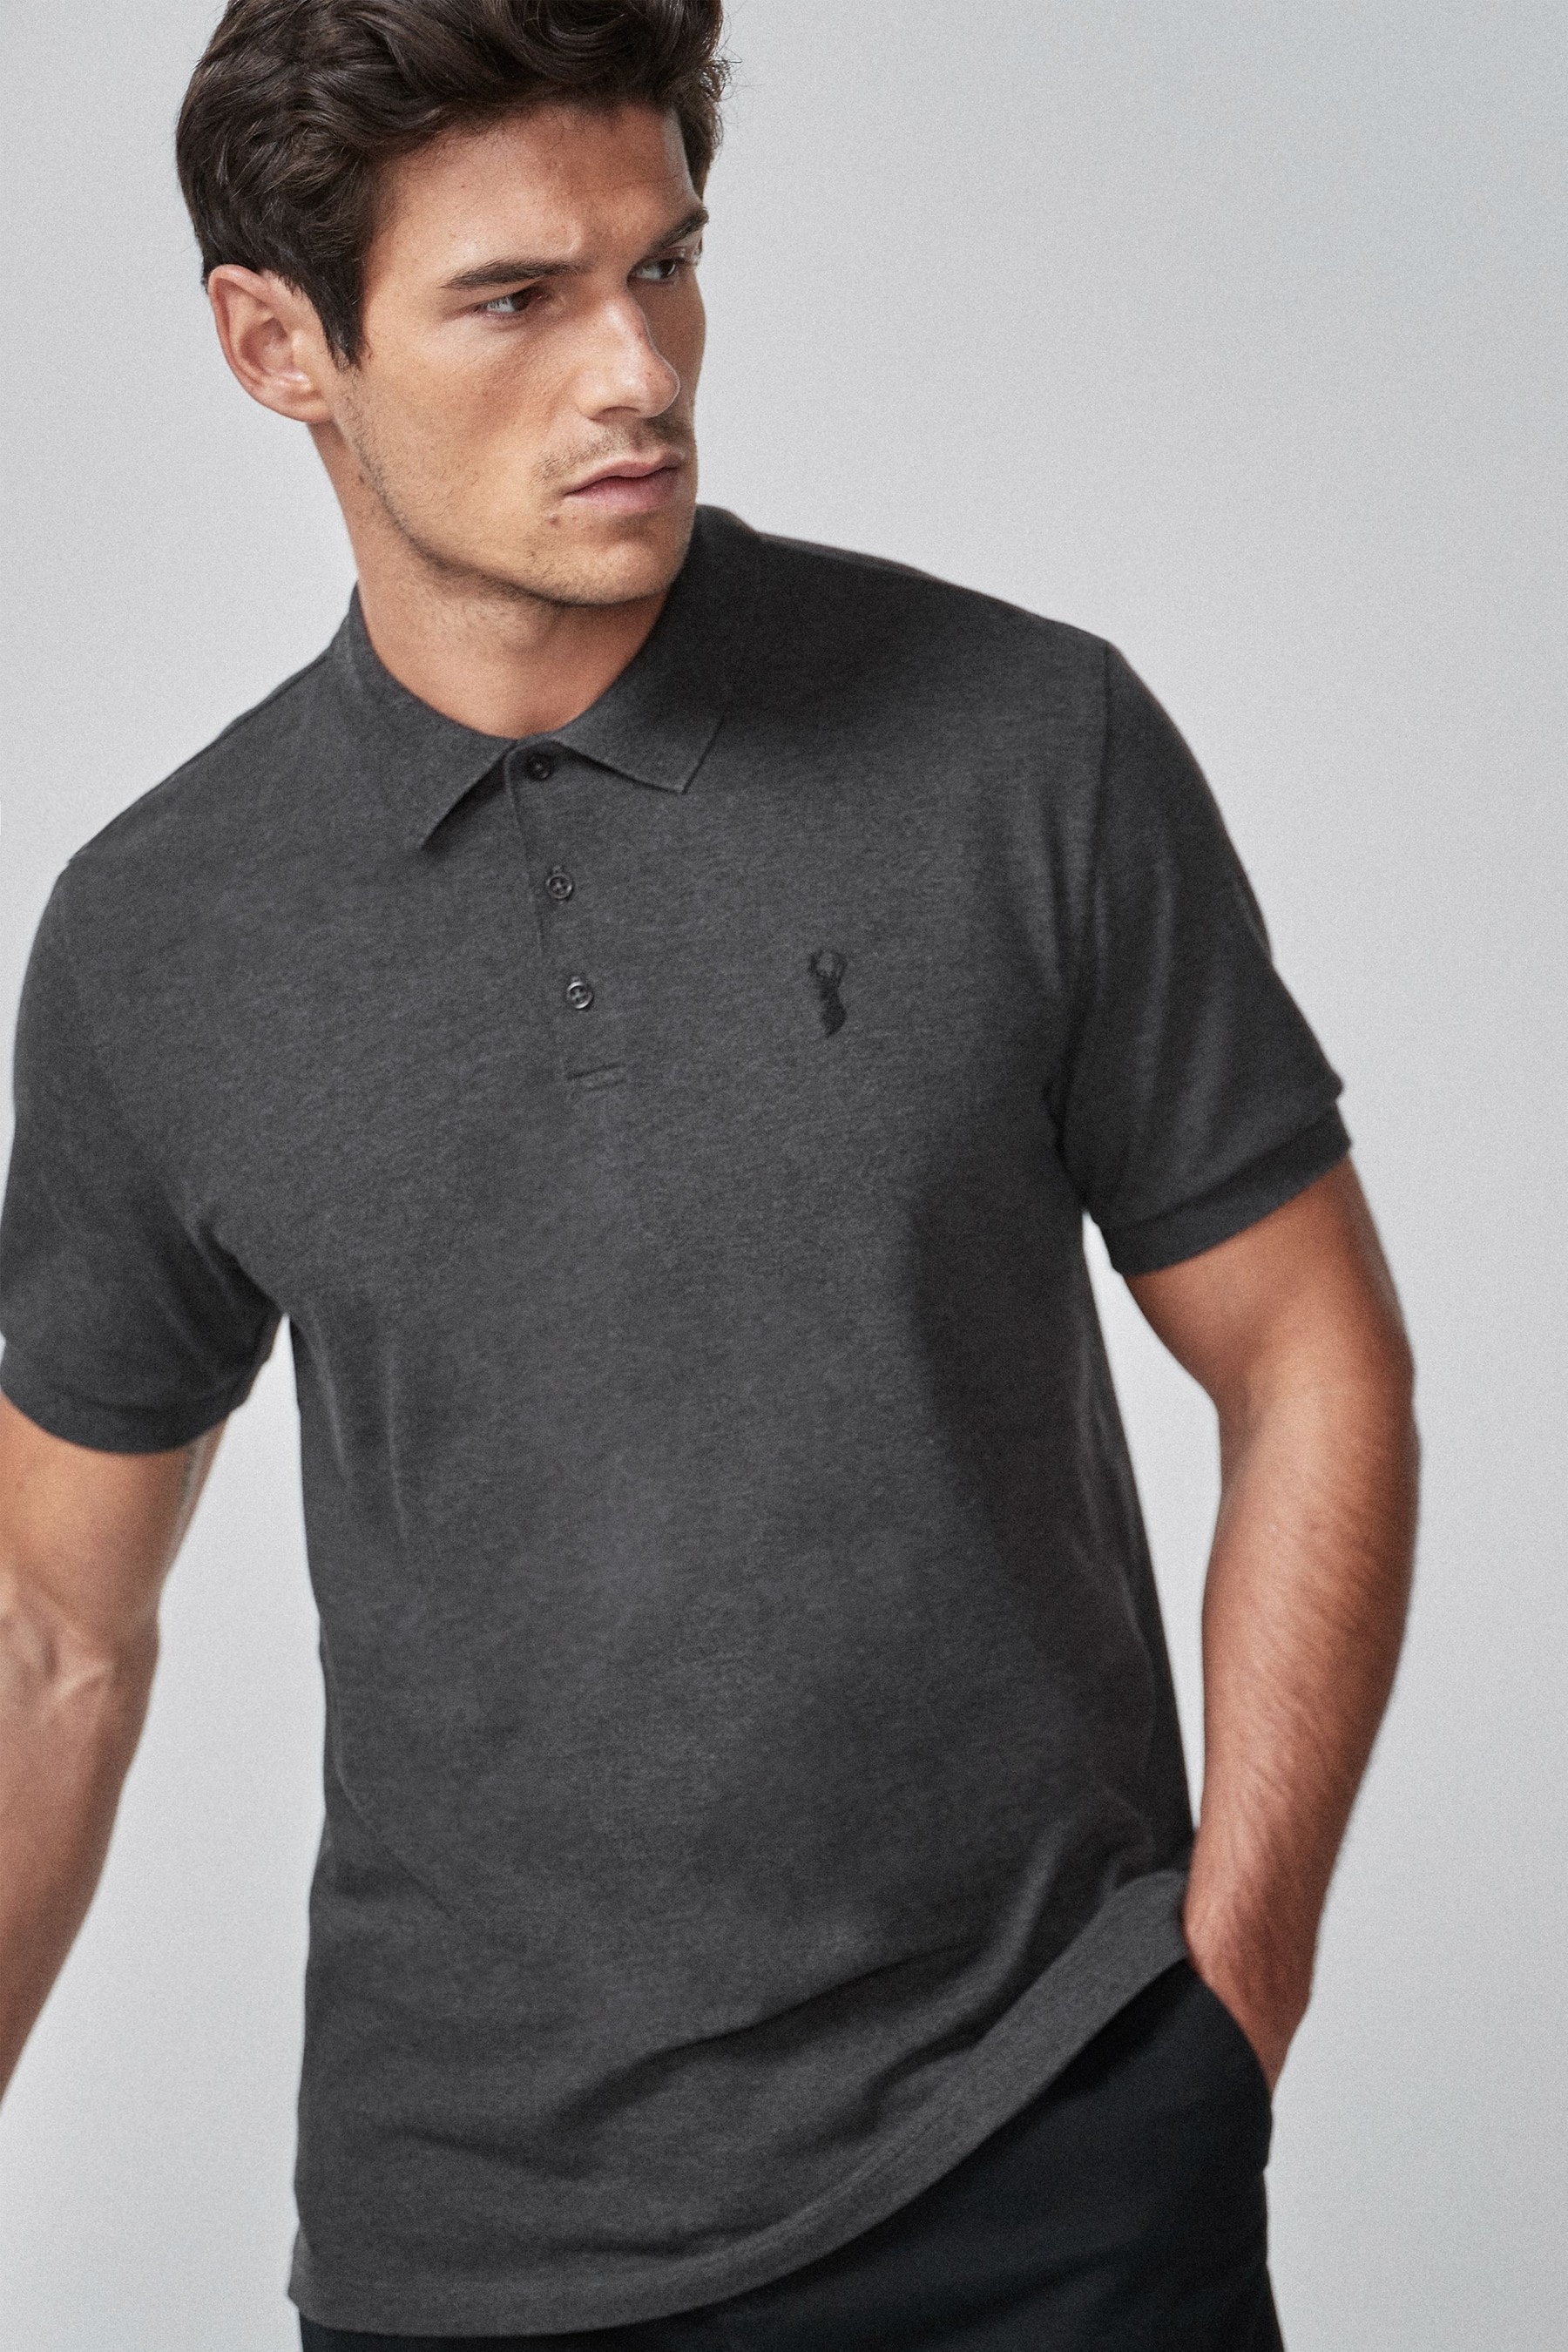 Buy Grey Charcoal Regular Fit Pique Polo Shirt from the Next UK online shop